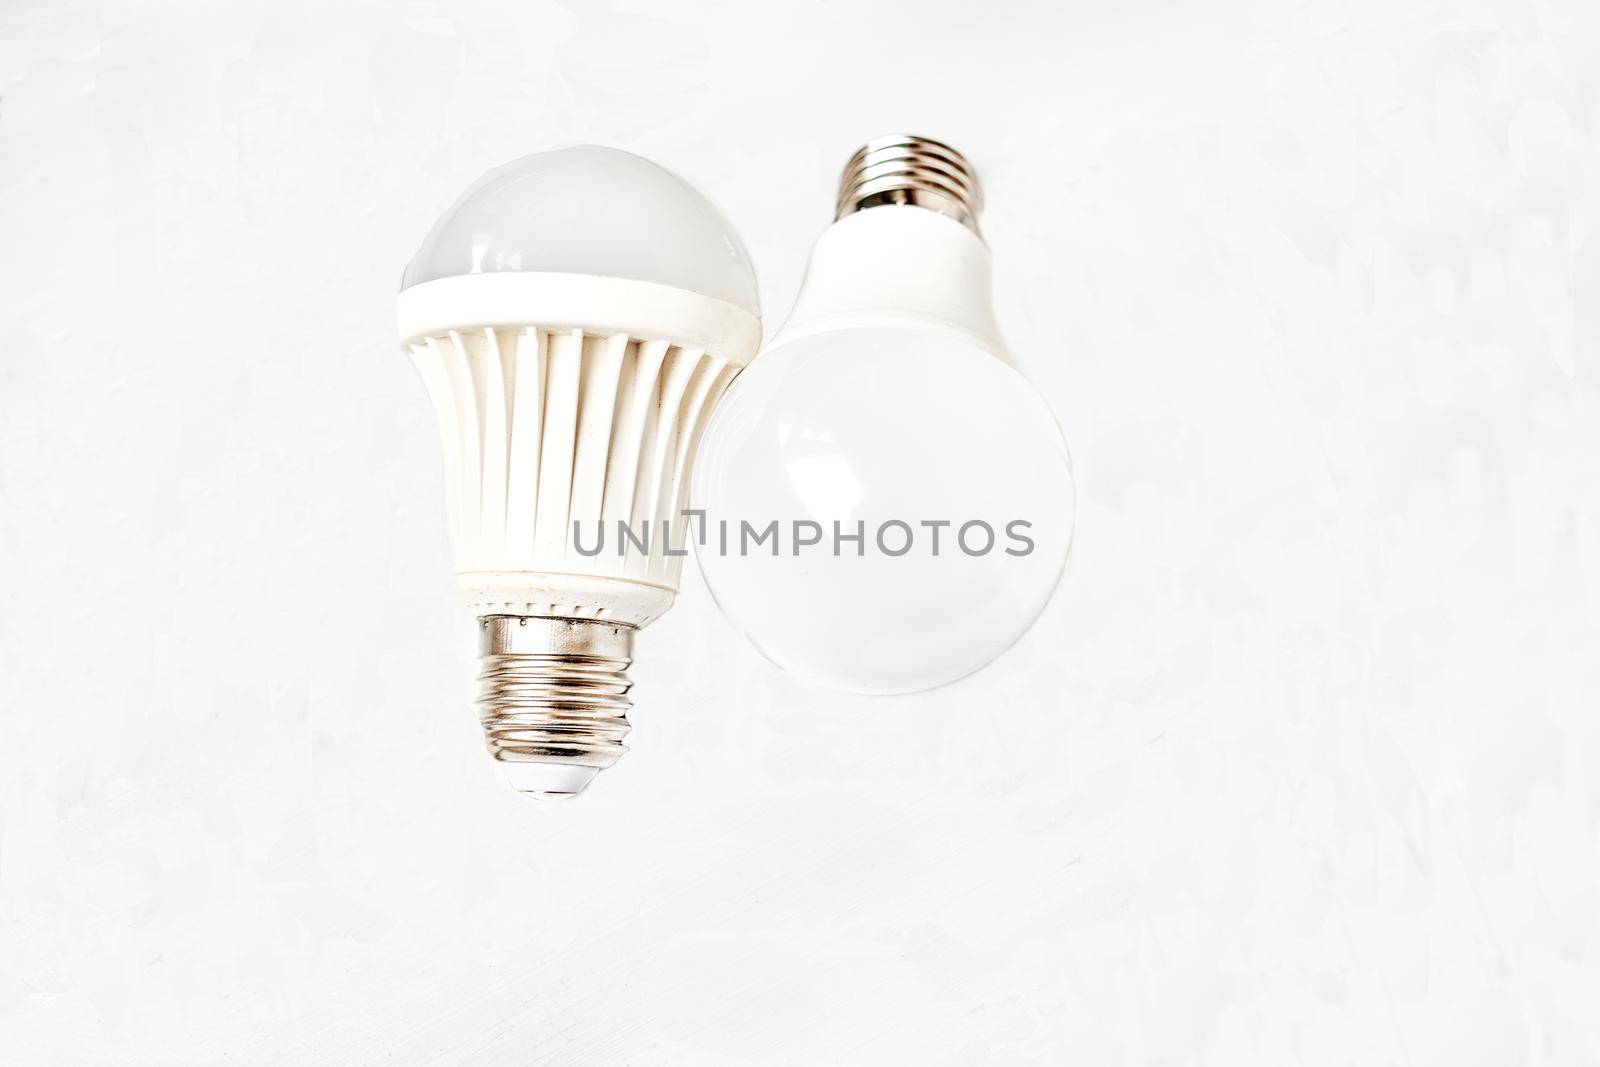 Two led power bulbs on a white background by jovani68